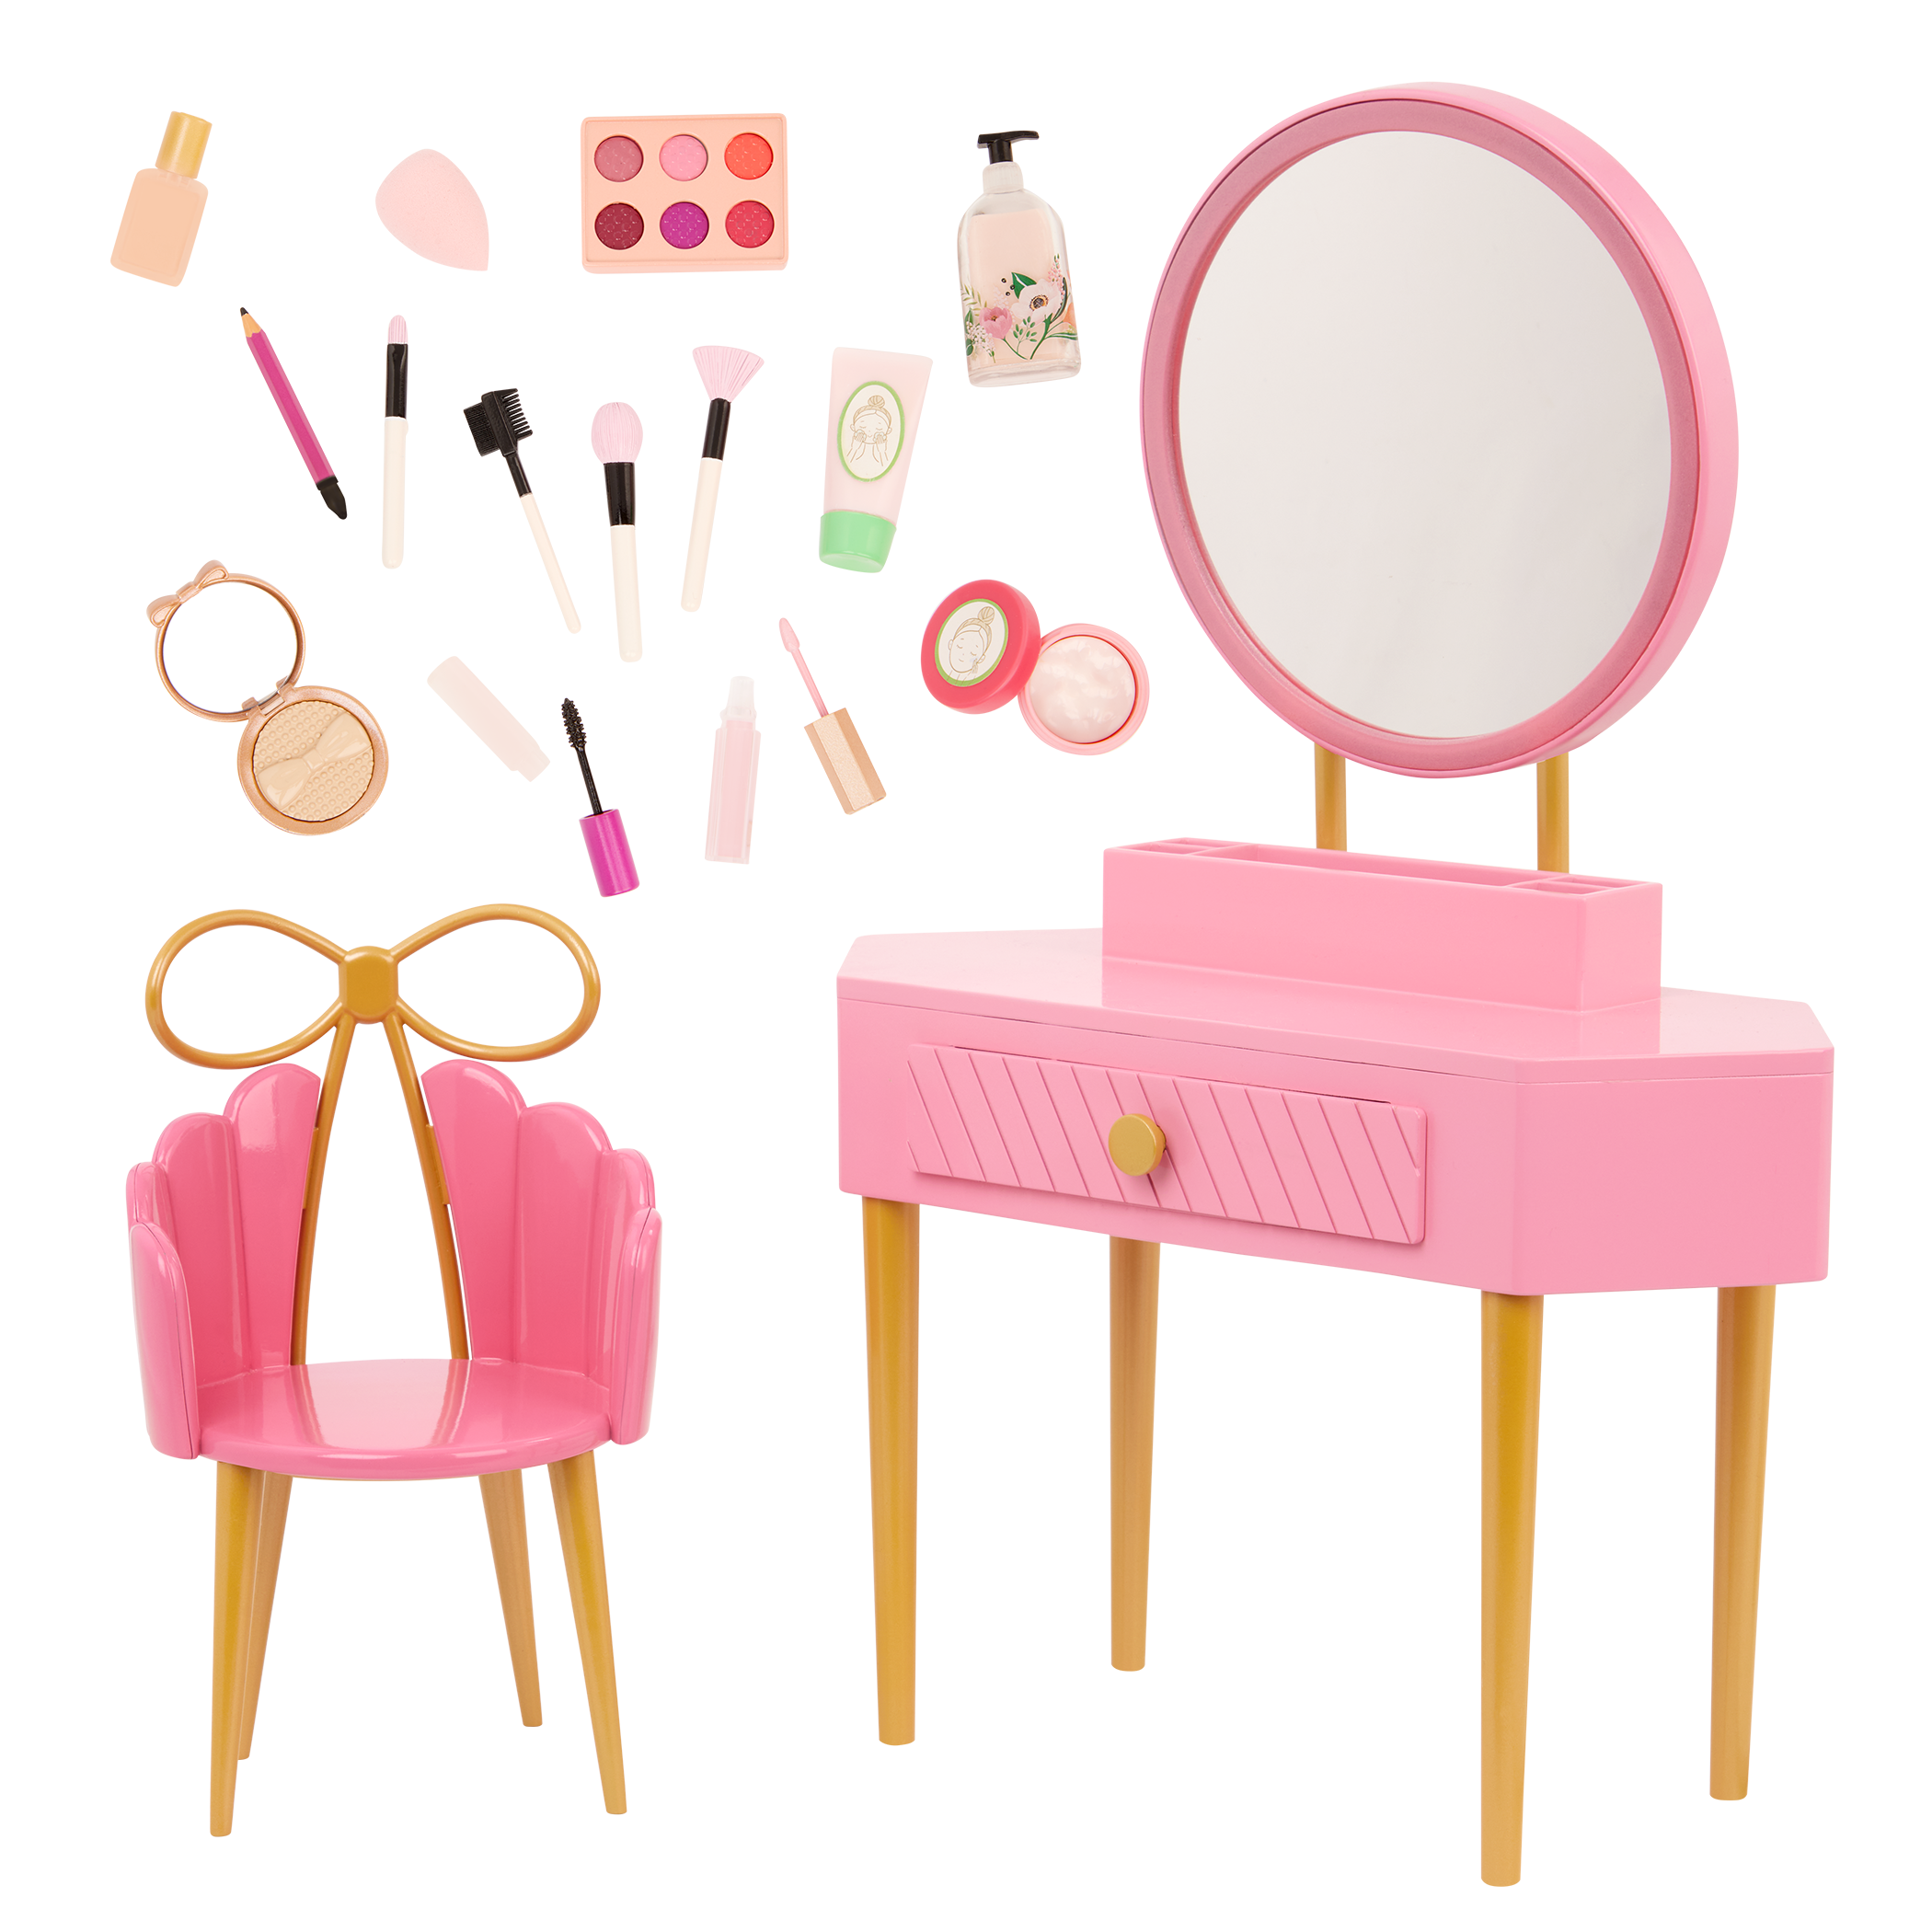 Our Generation Fabulous Fun Vanity Set for 18 inch Dolls including vanity table and chair, make up and skin care 